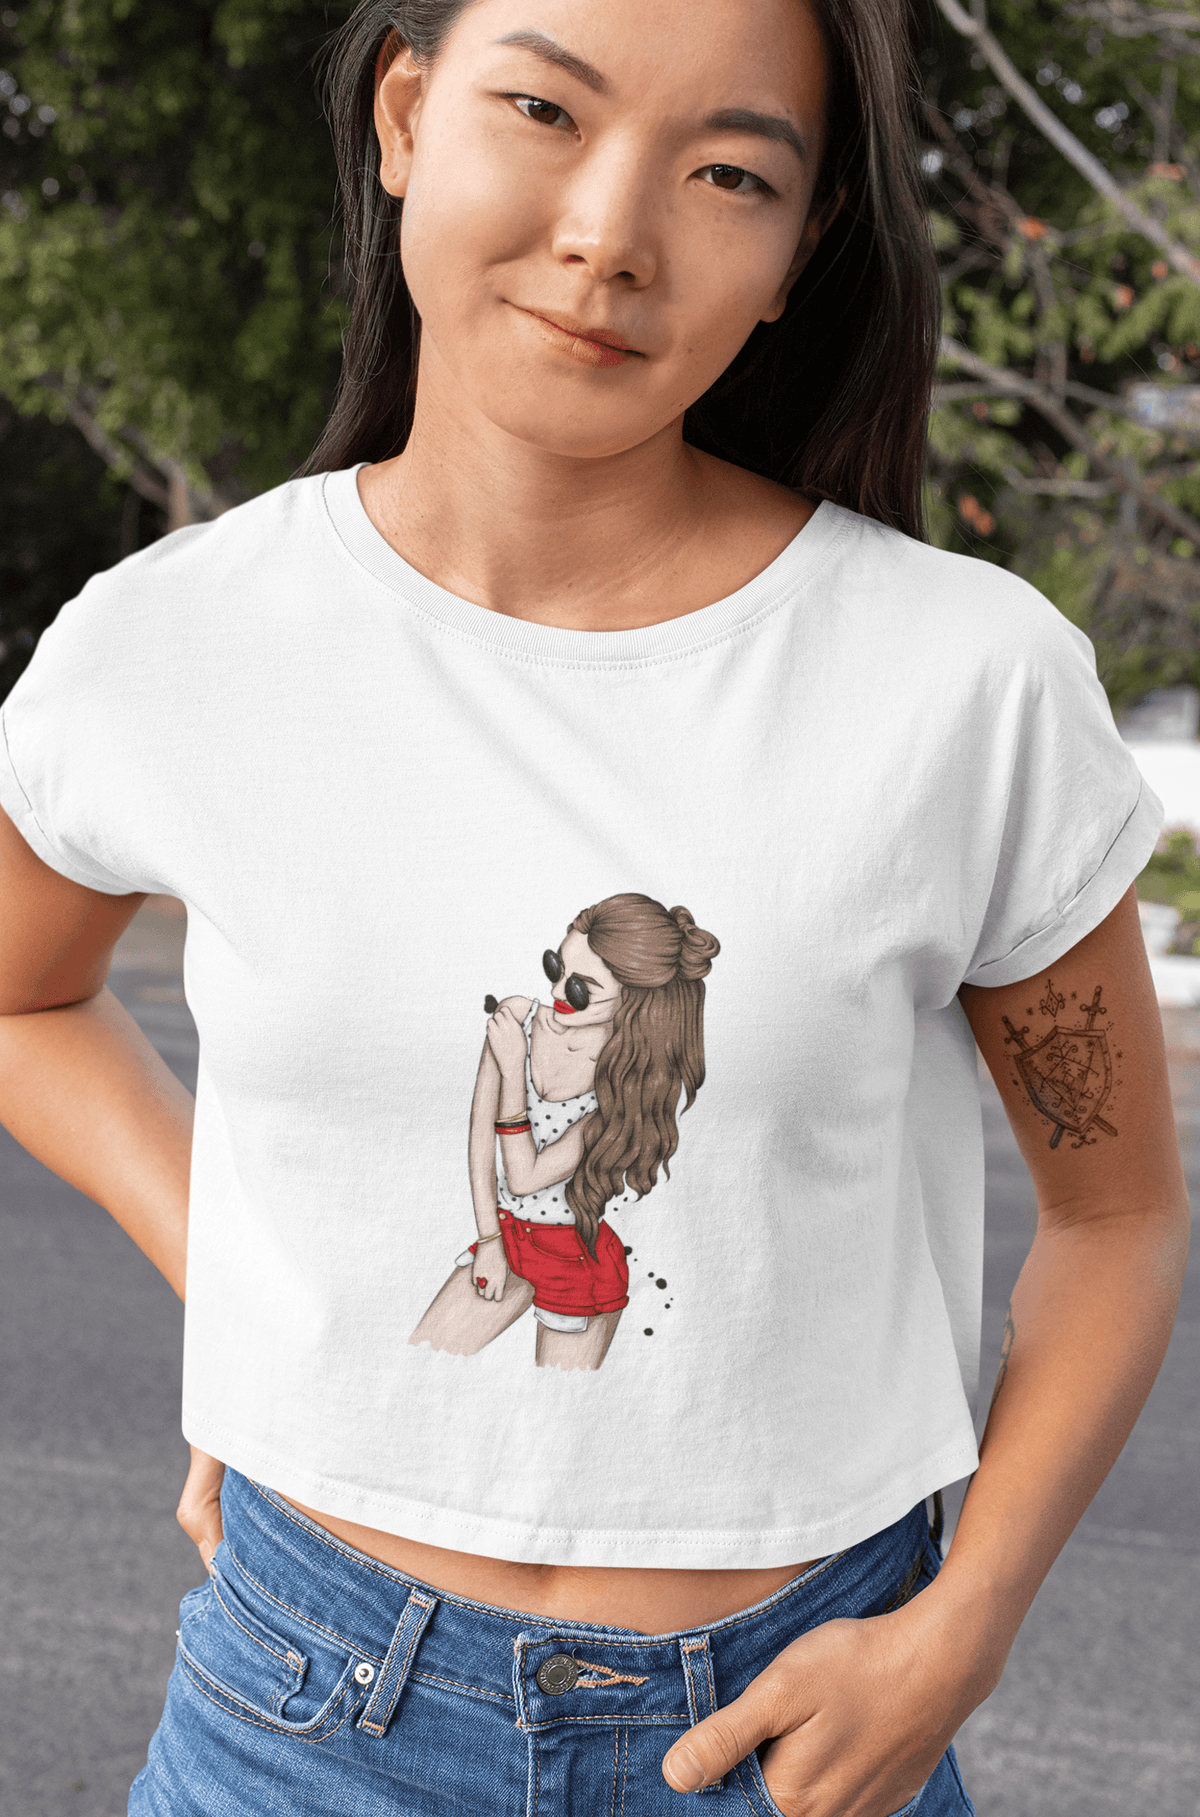 Chic & Classy Crescendos Cropped T-Shirt - StylinArt